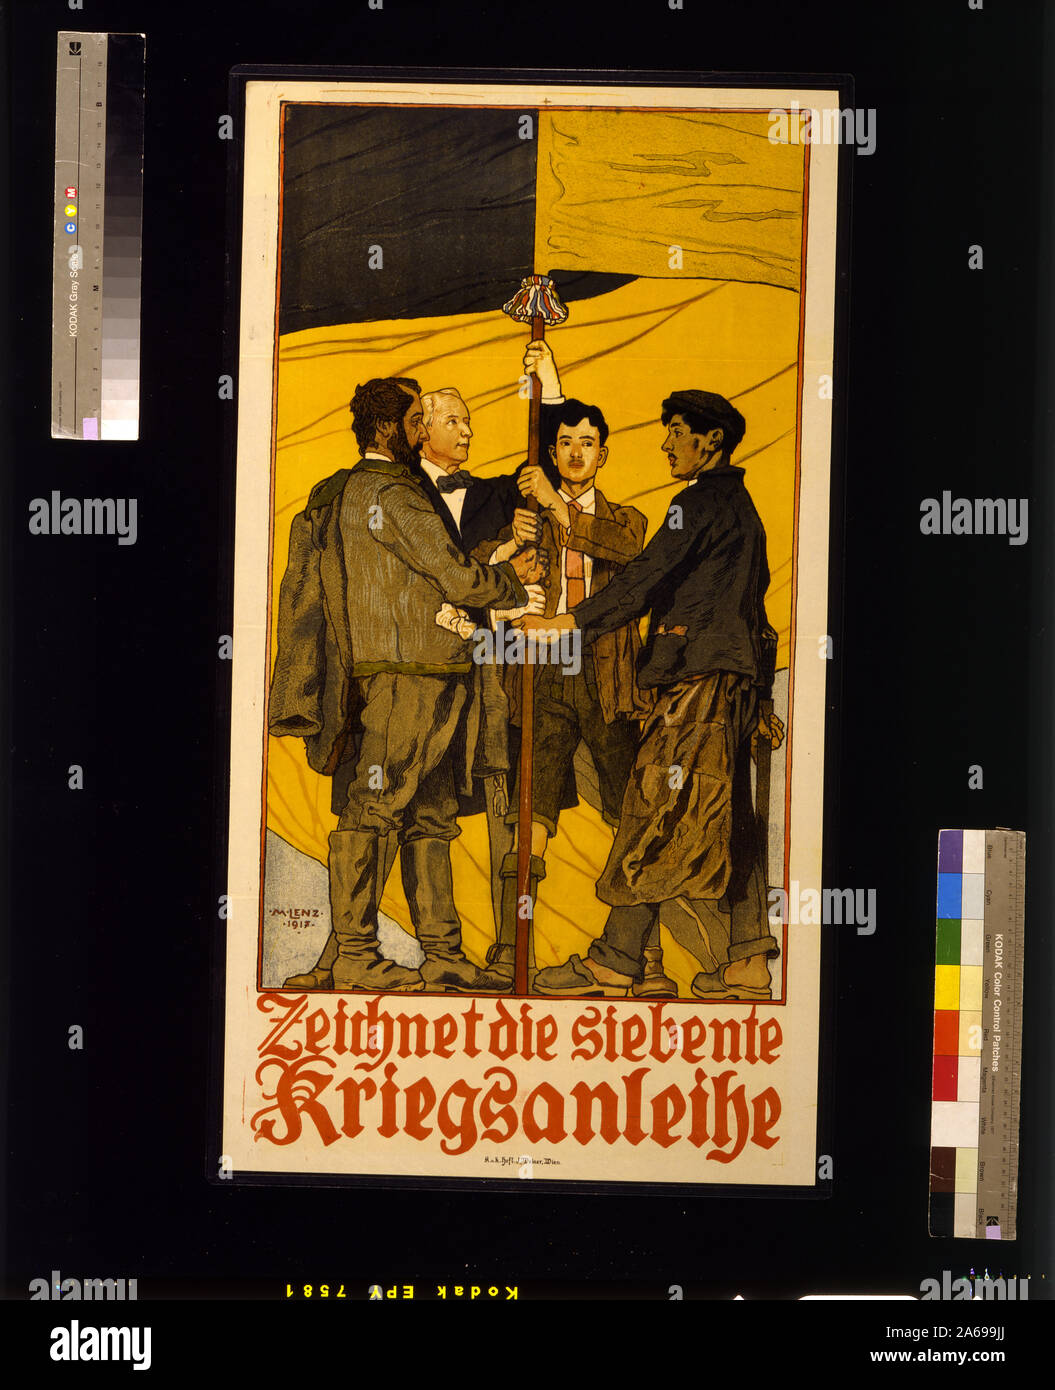 Zeichnet die siebente Kriegsanleihe Abstract: Poster shows four men, representing various classes of Austrian society - professional, laborer, farmer, and student() --, holding a flag pole. Text: Subscribe to the 7th War Loan. Stock Photo